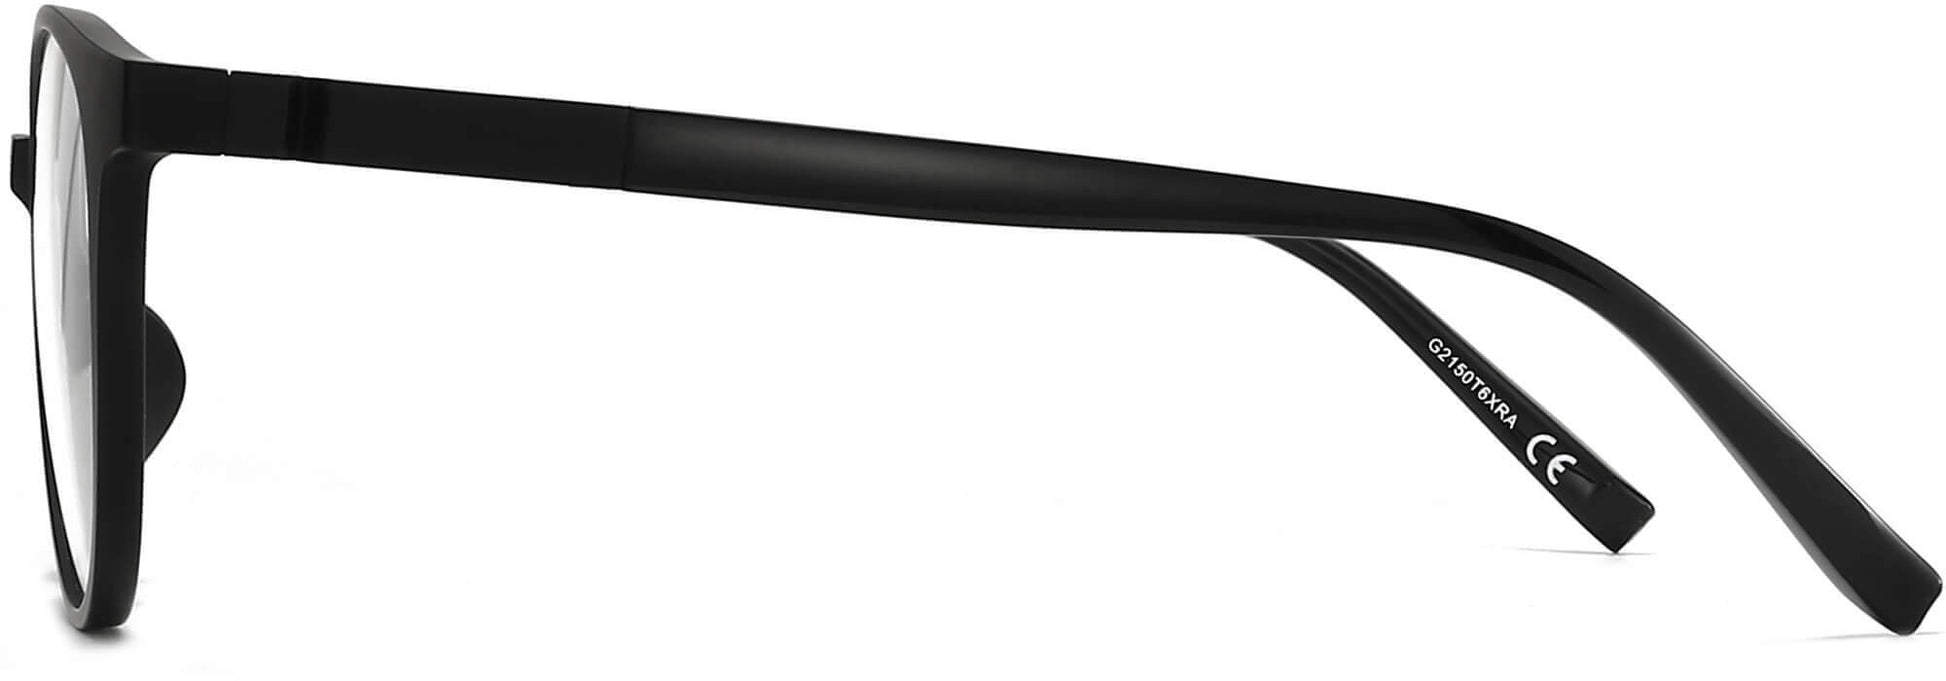 Calvin Round Black Eyeglasses from ANRRI, side view